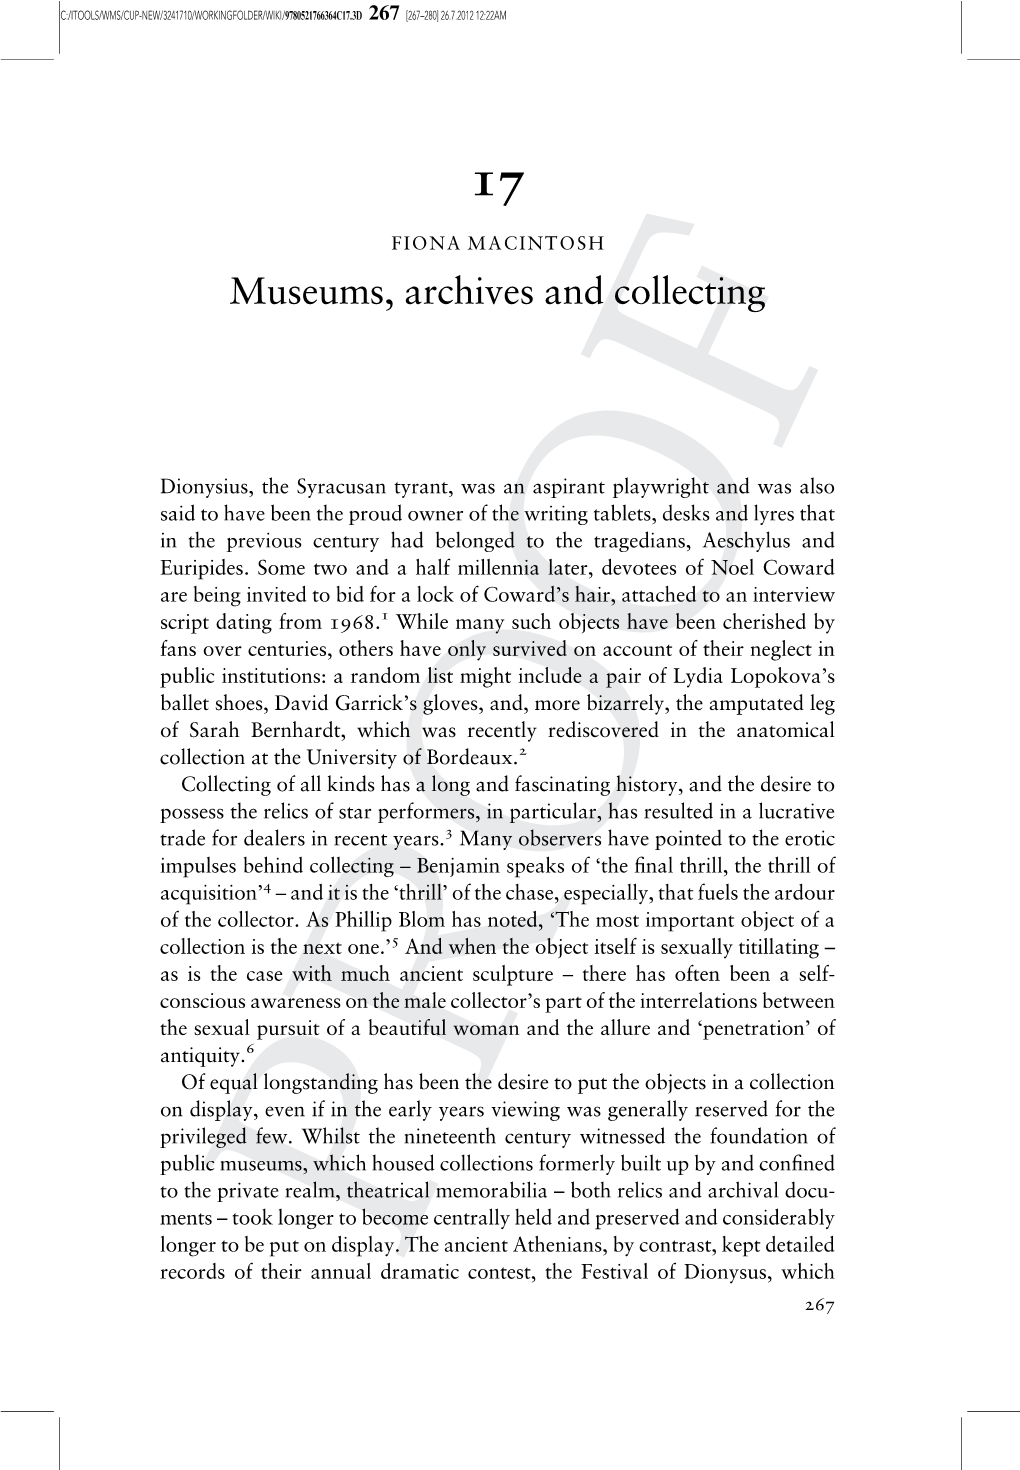 Museums, Archives and Collecting